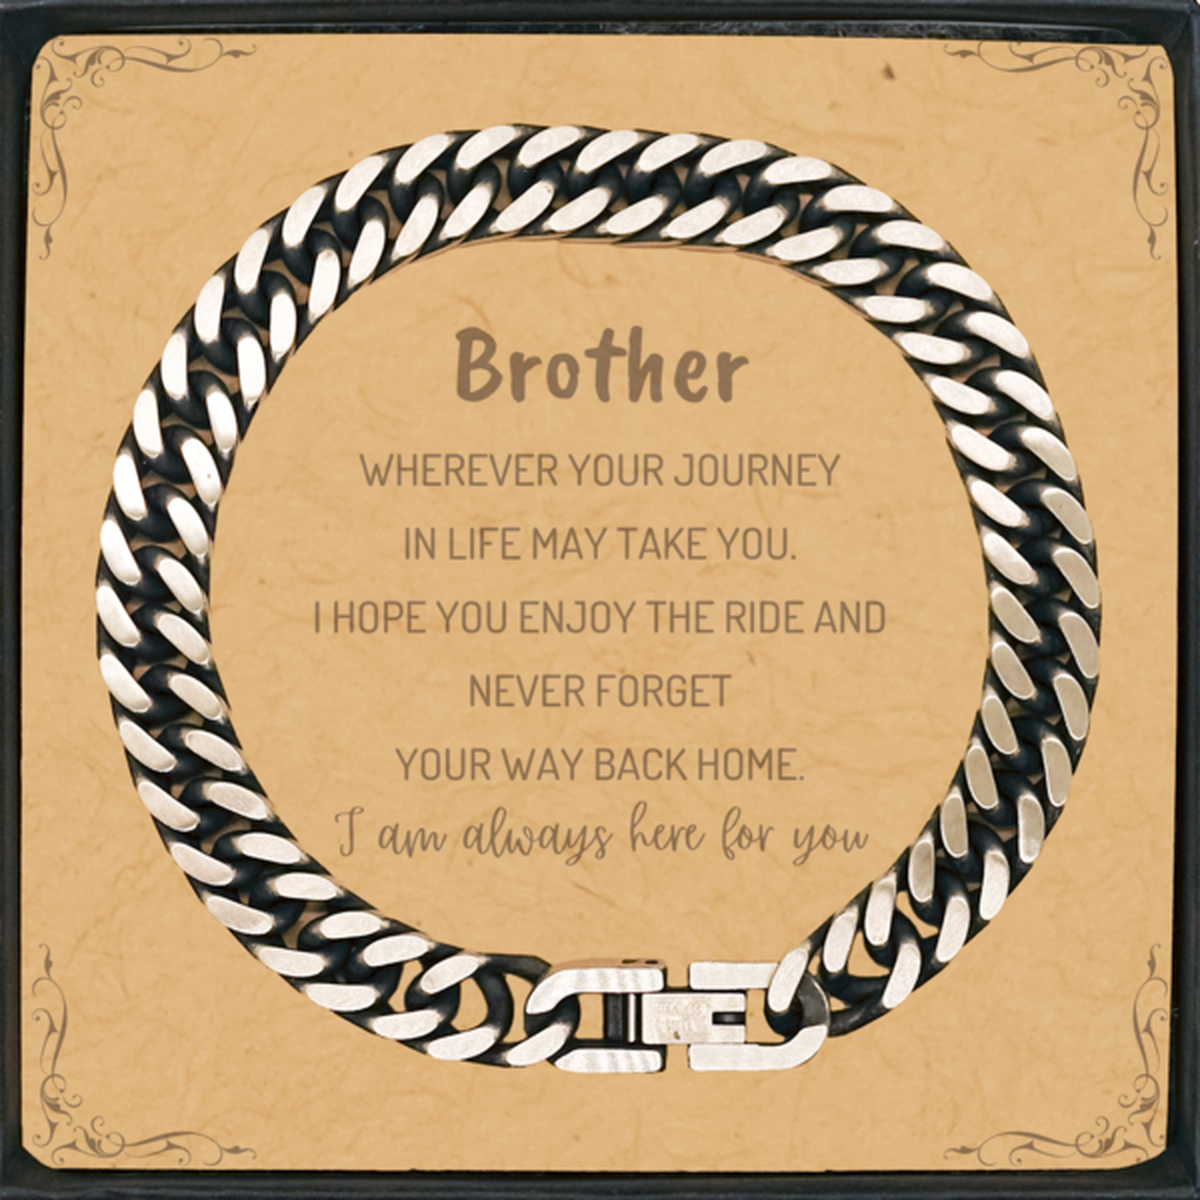 Brother wherever your journey in life may take you, I am always here for you Brother Cuban Link Chain Bracelet, Awesome Christmas Gifts For Brother Message Card, Brother Birthday Gifts for Men Women Family Loved One